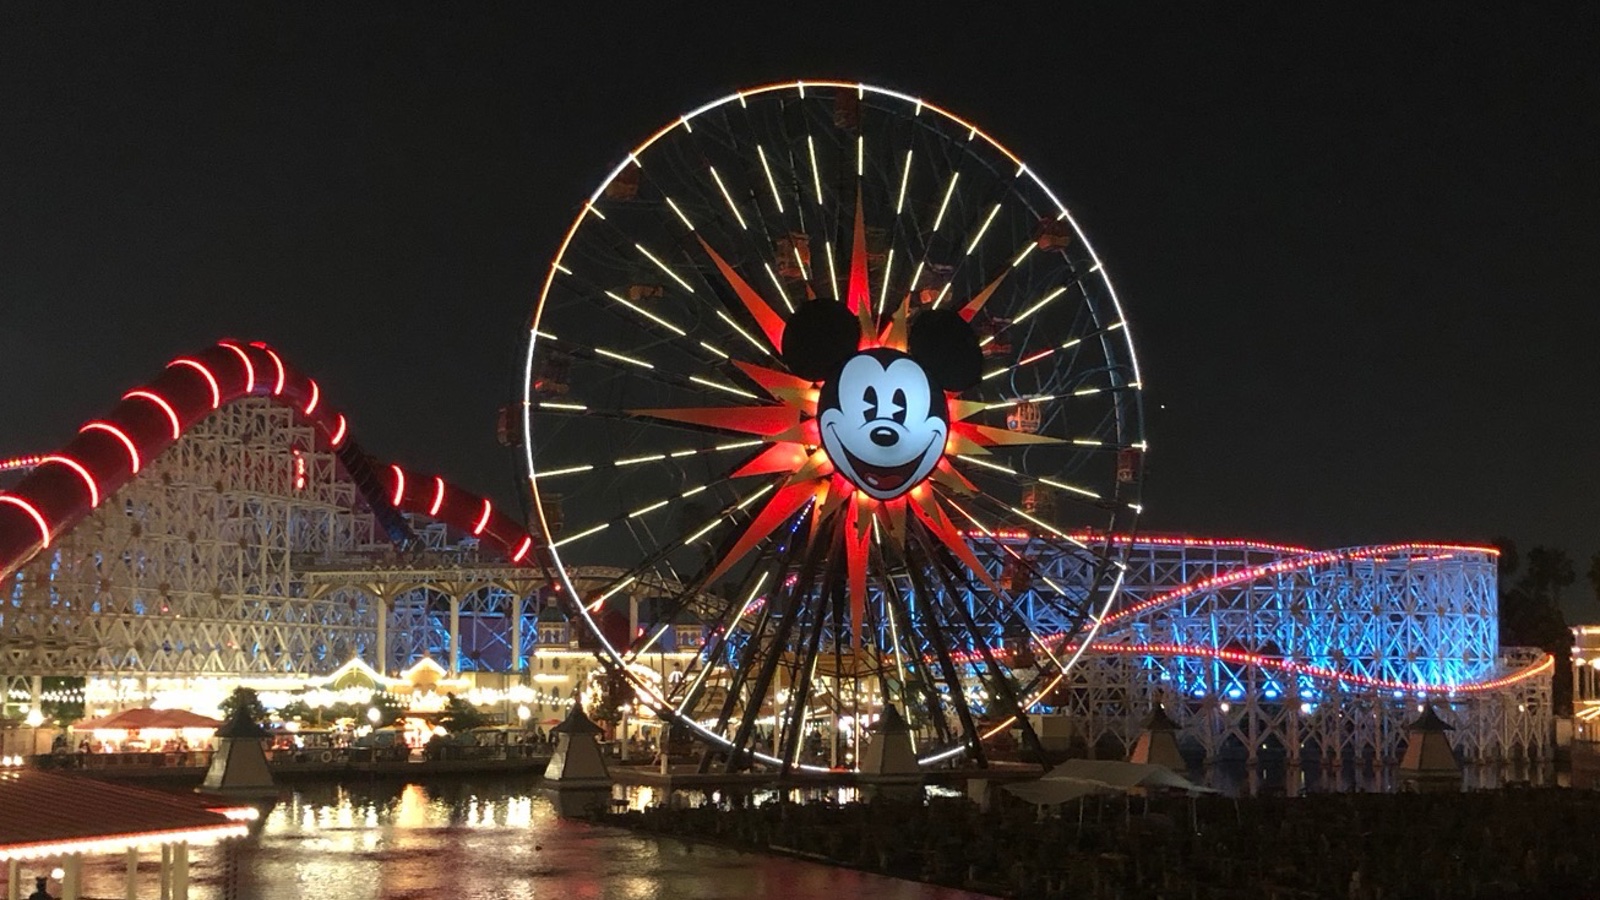 How To Get The Best Out Of A Trip To Disneyland